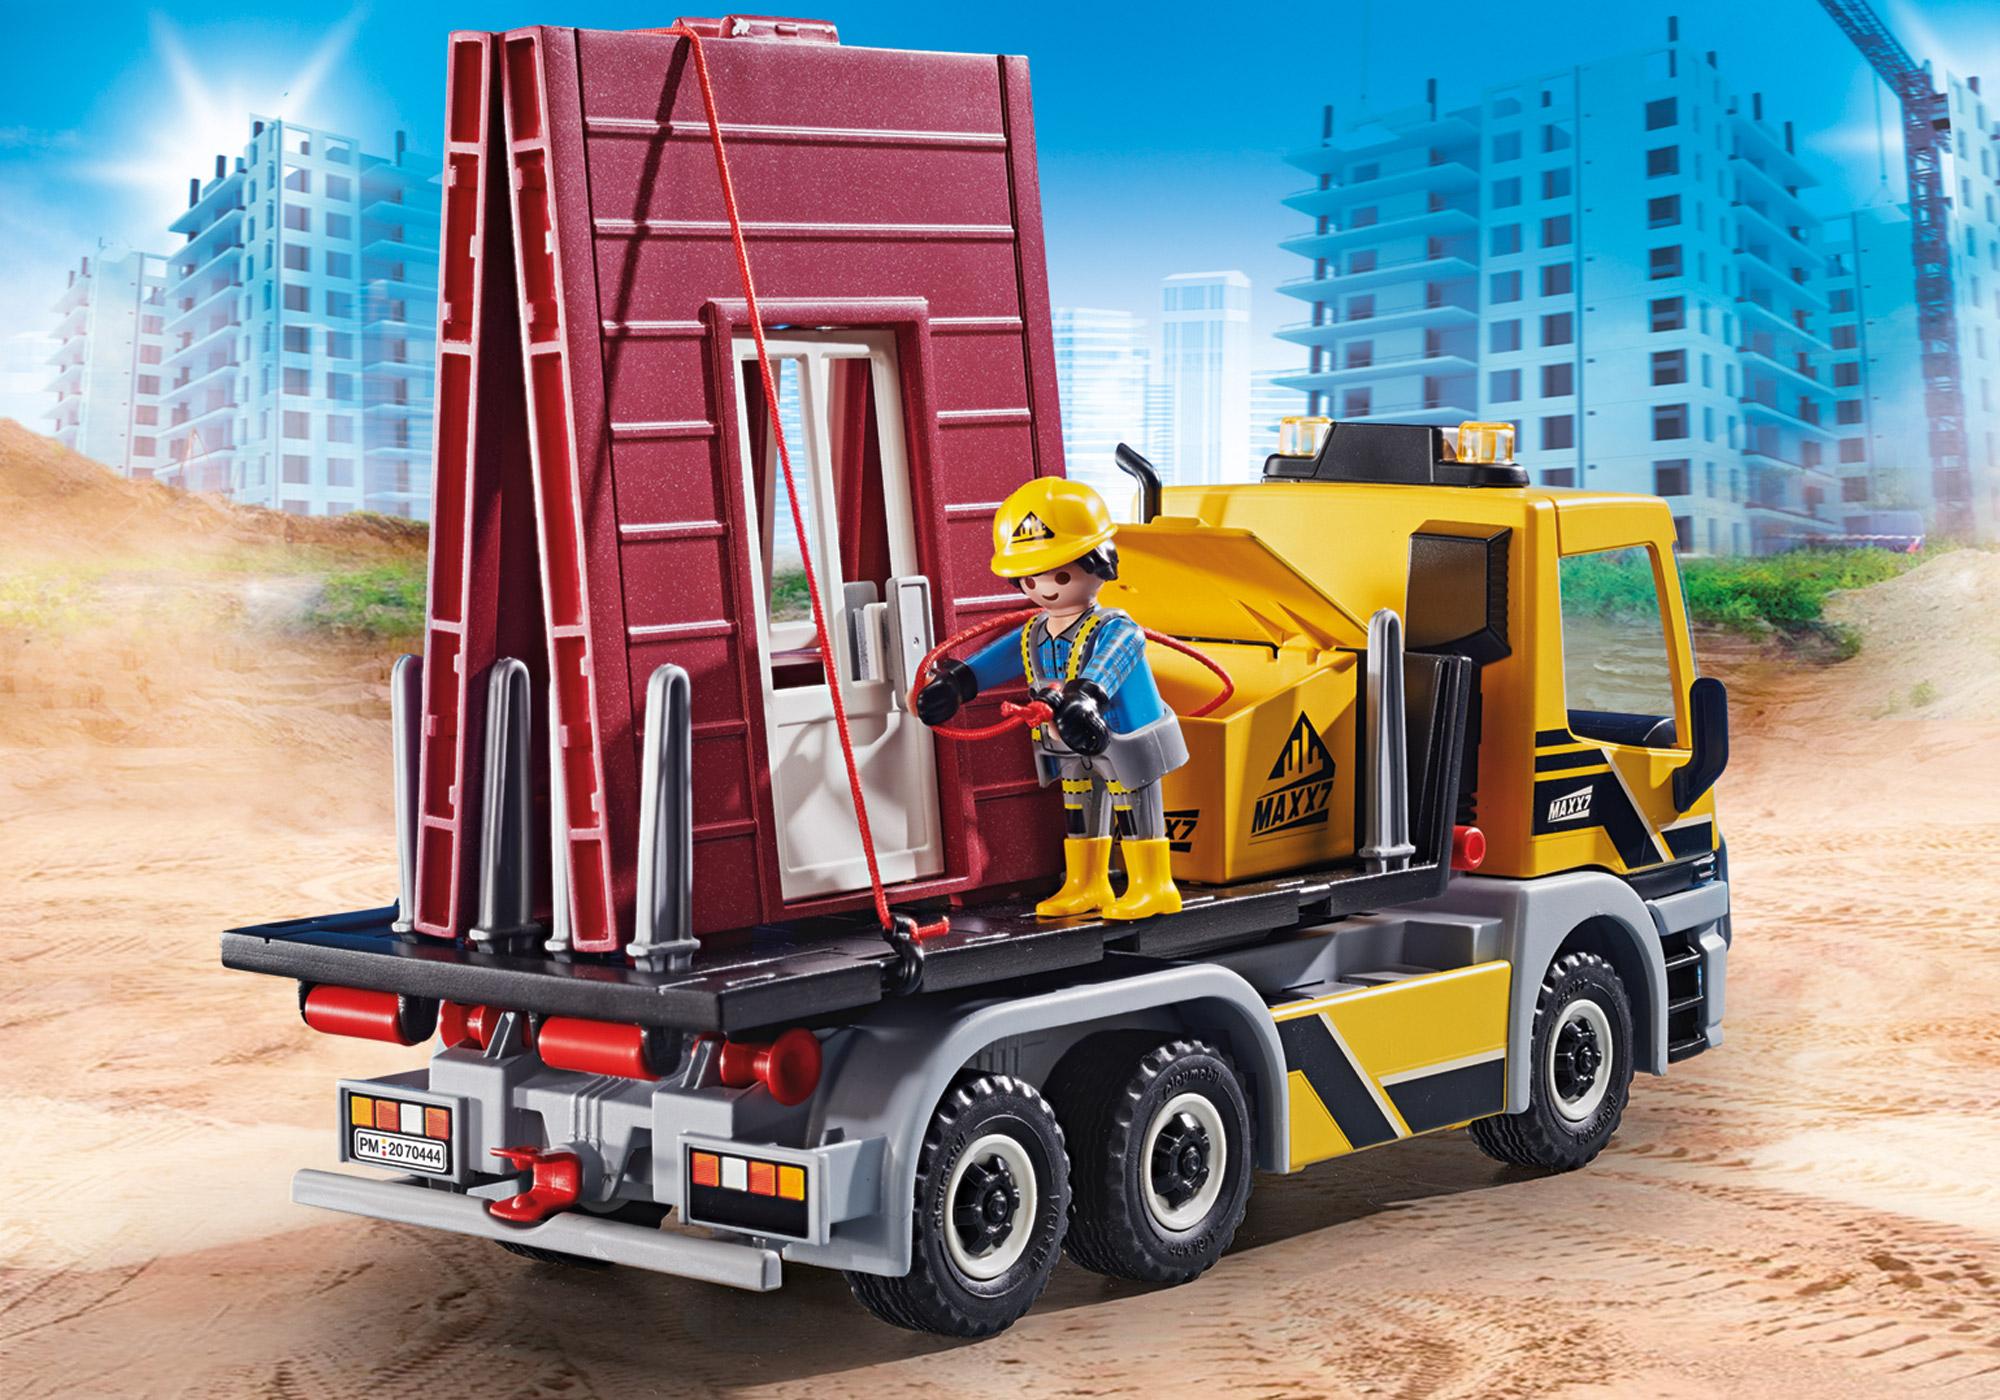 Playmobil Chantier Grue Monte-Charge Pour Camion Benne